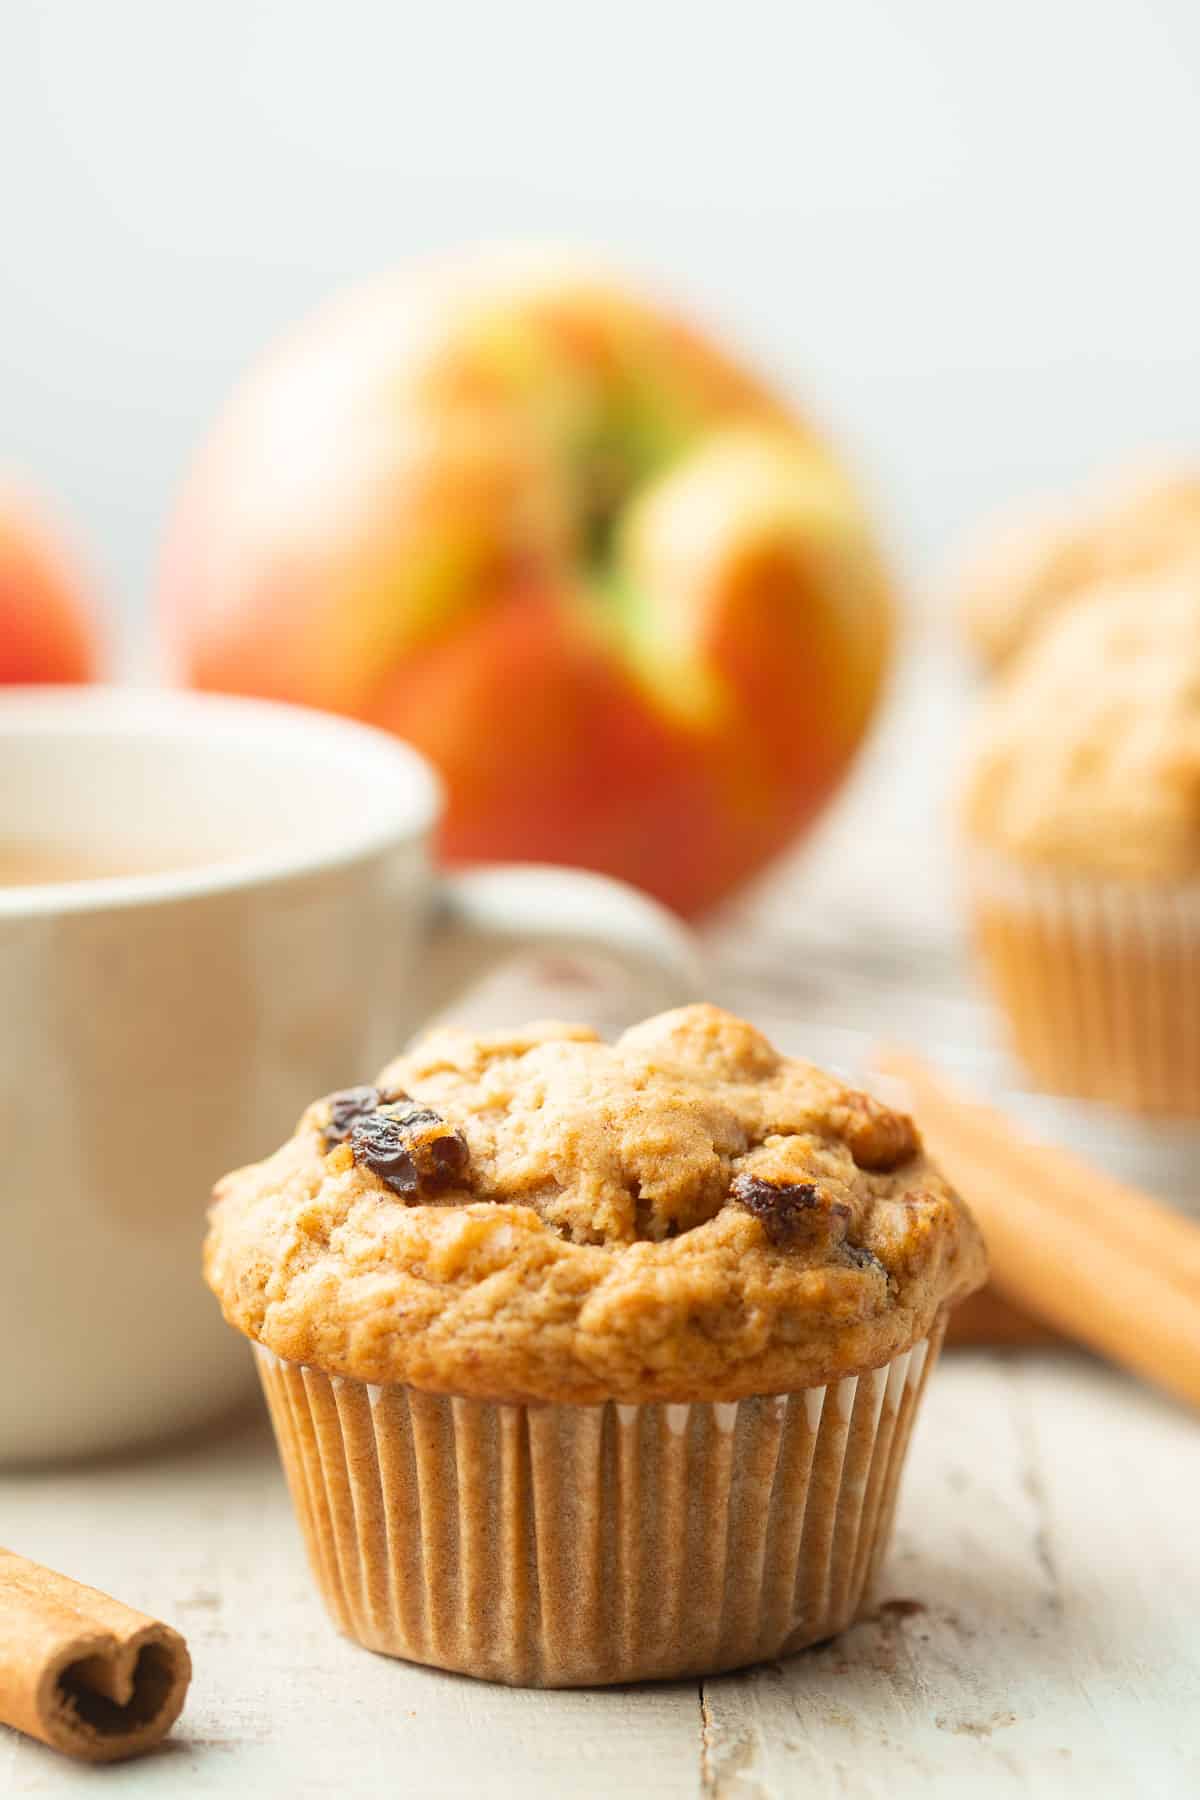 Vegan Applesauce Muffin with tea cup and apples in the background.